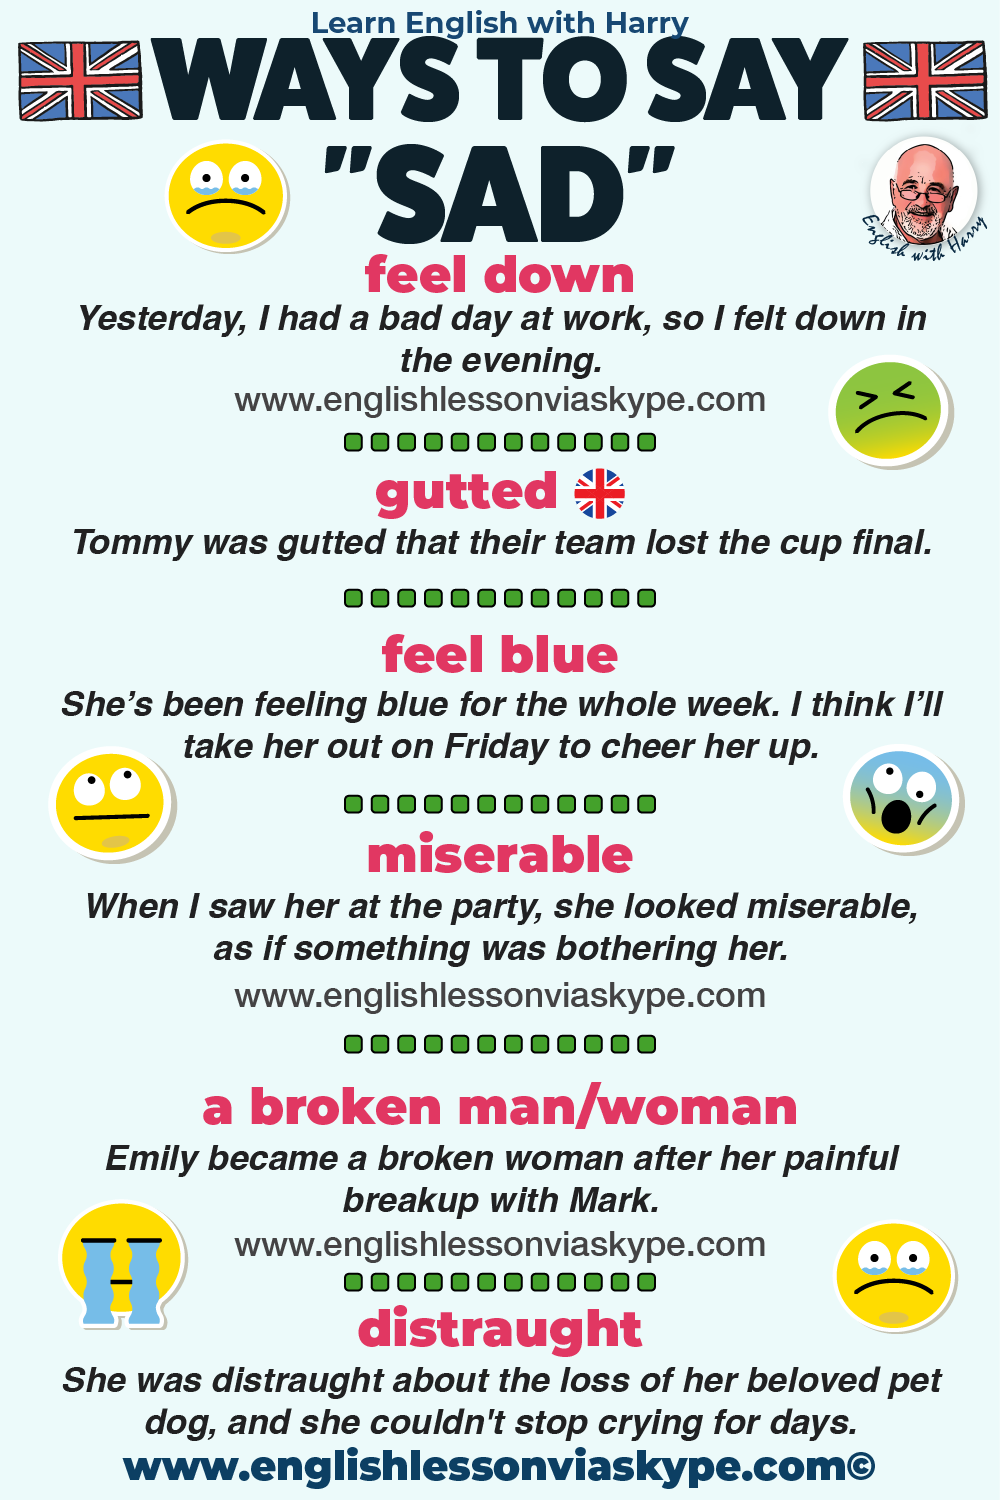 Ways to say sad in English. English speaking skills. Improve English speaking skills. Upgrade your vocabulary. English grammar rules. Improve English speaking. Advanced English lessons on Zoom and Skype. Improve English speaking and writing skills. #learnenglish